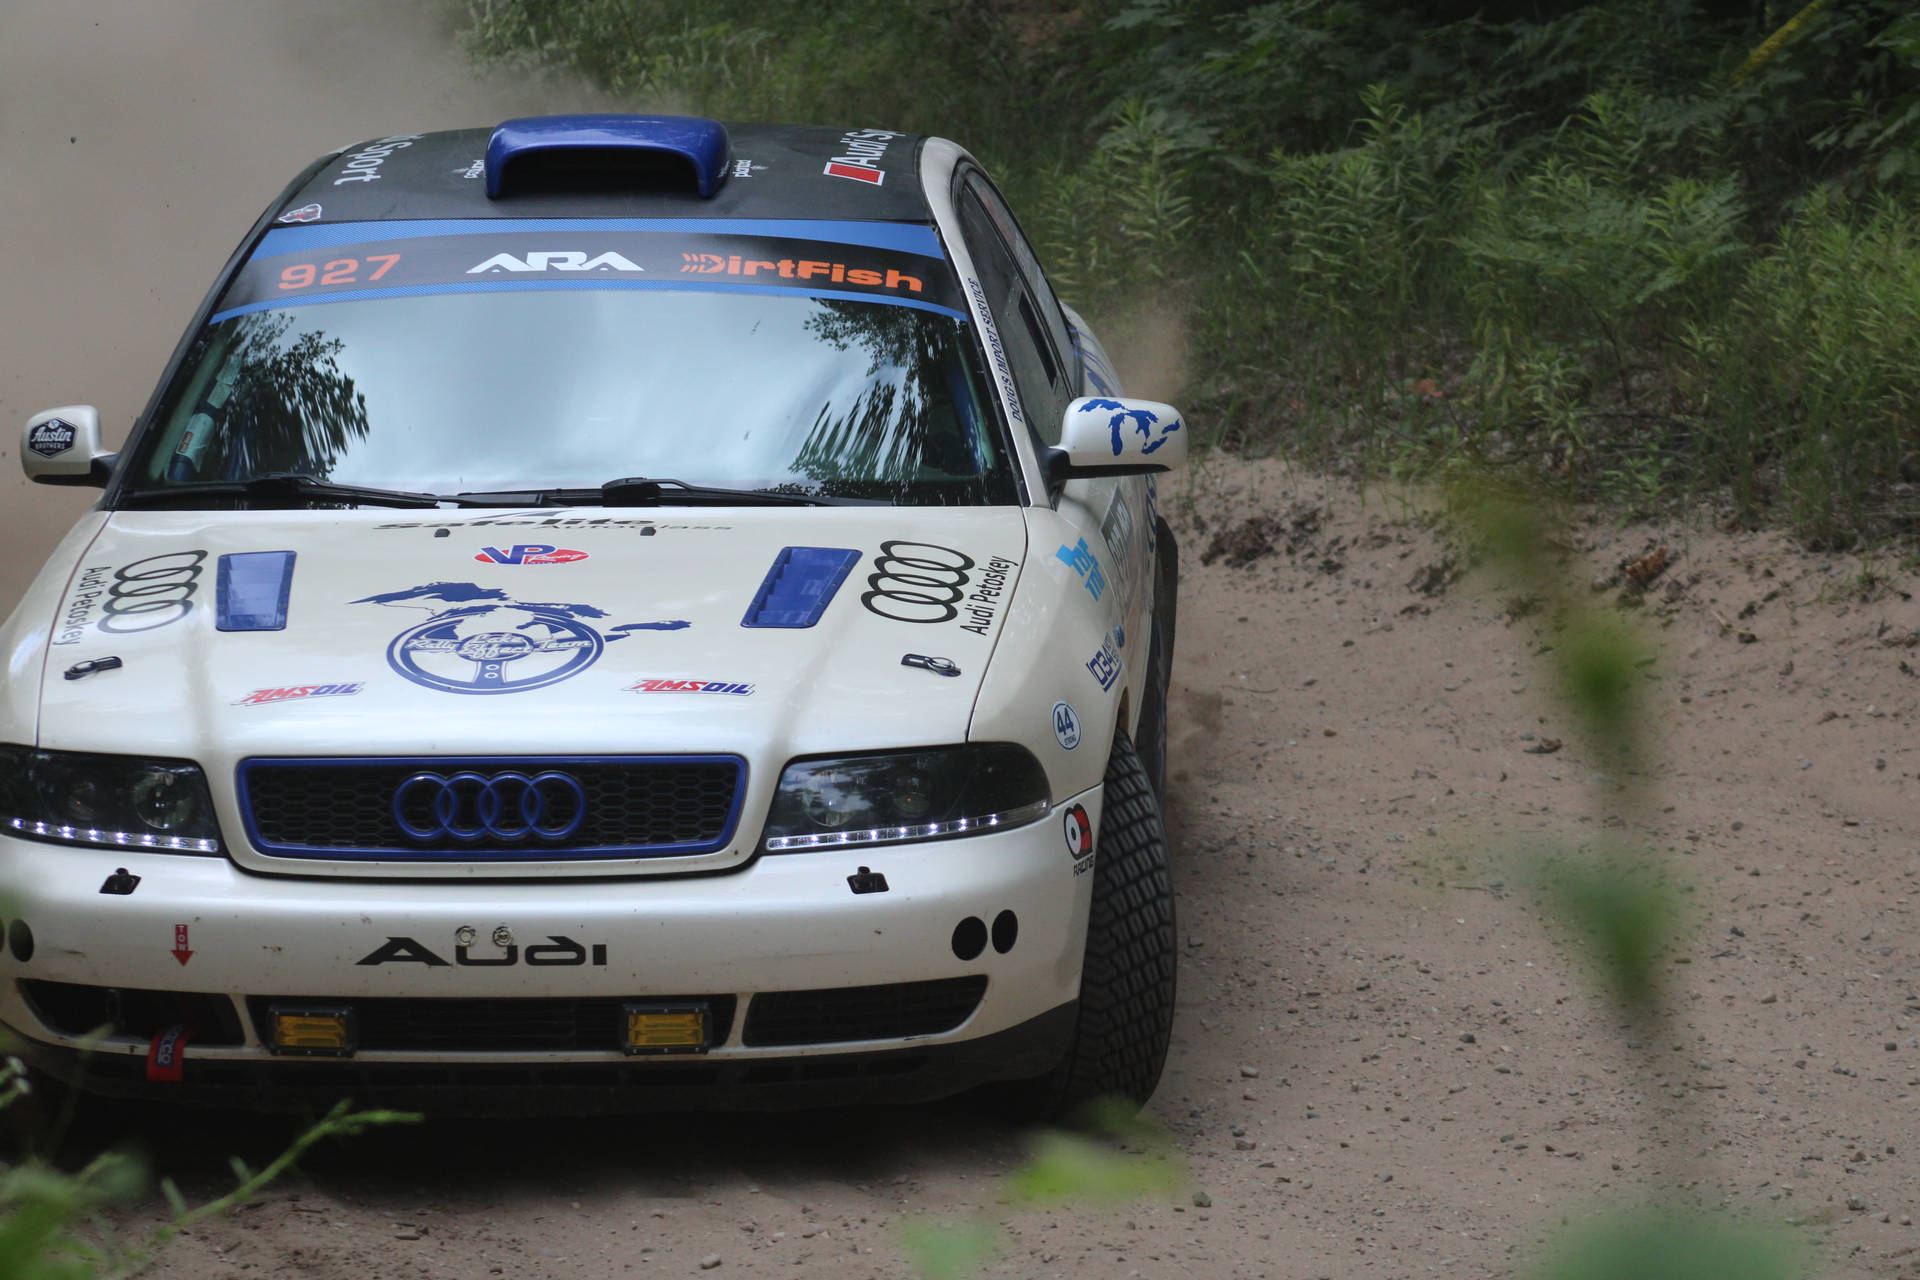 Audi A4 B5 Model Racing In Dirt Rally Background